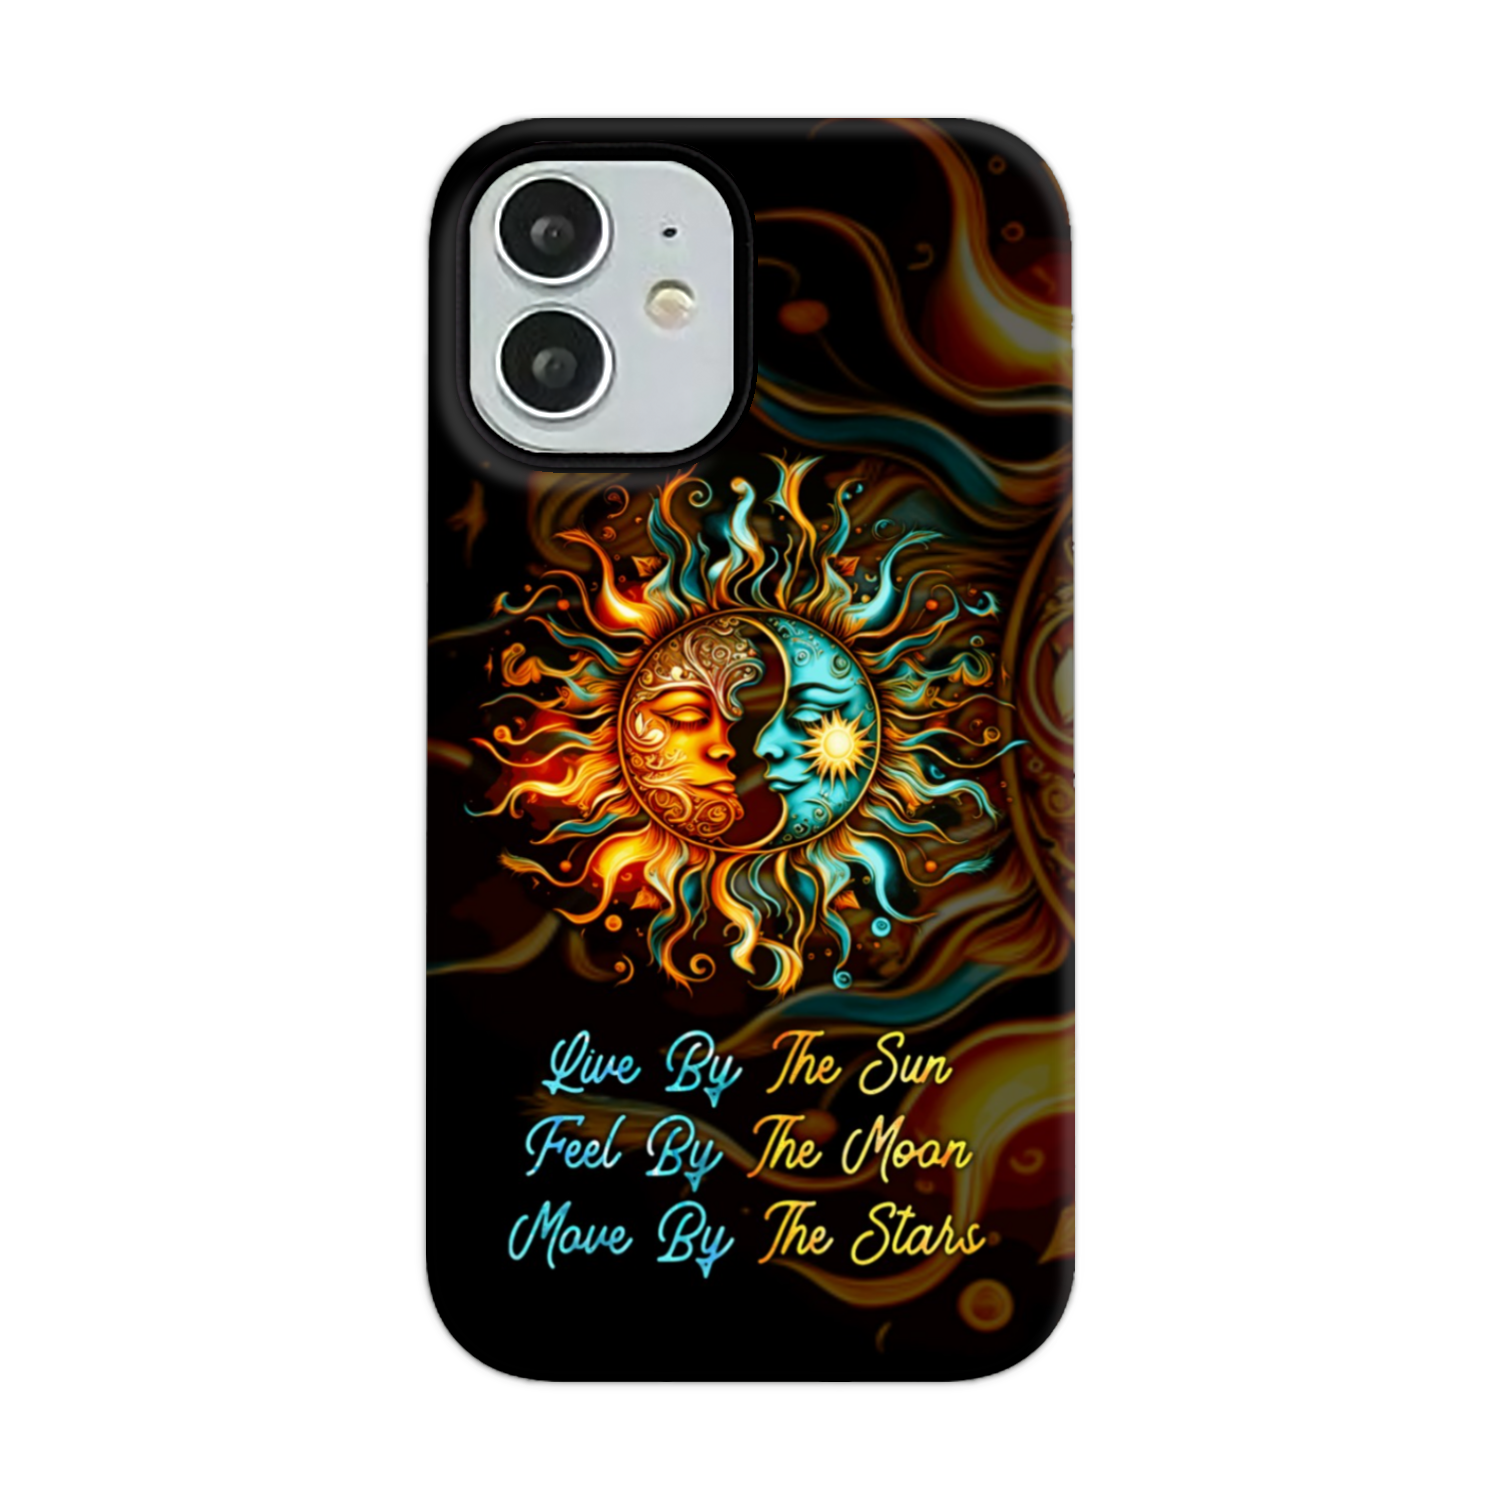 LIVE BY THE SUN PHONE CASE - TY0403232